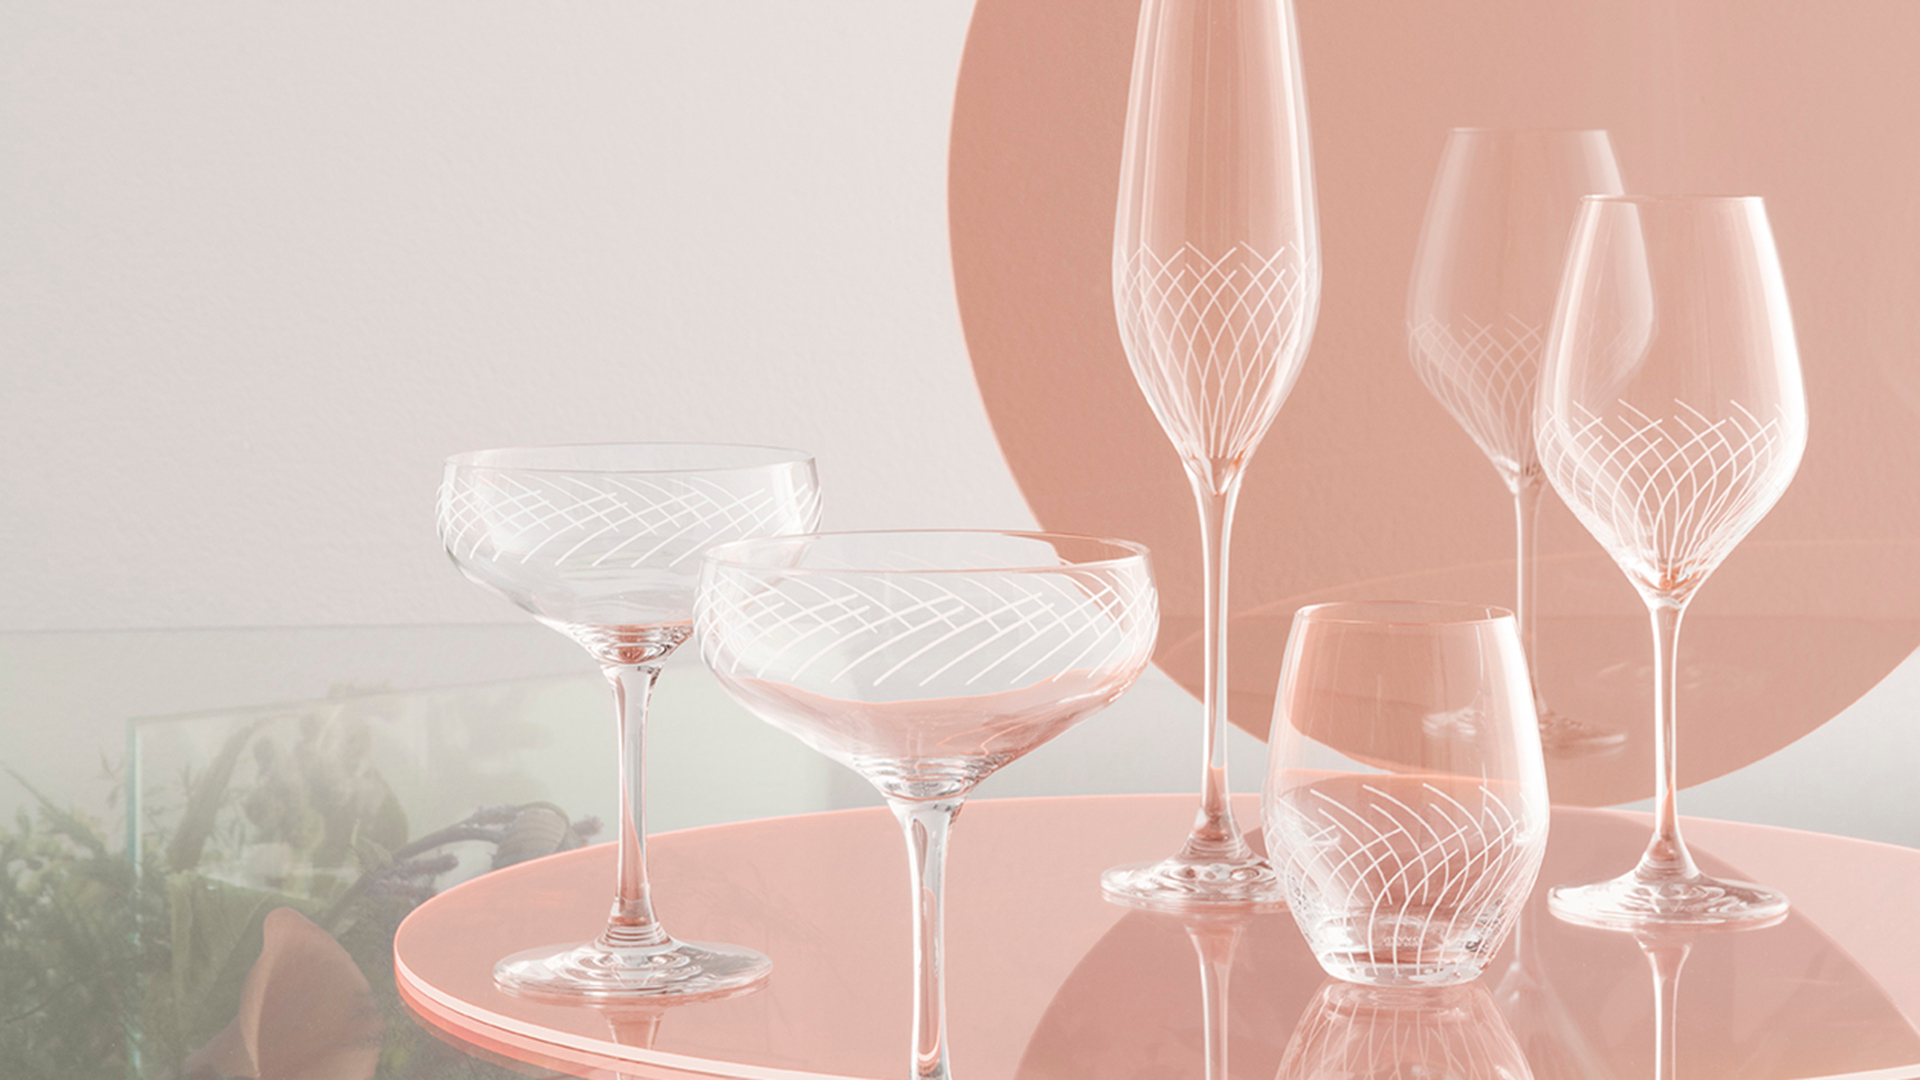 Carbernet Lines is a glass series of 6